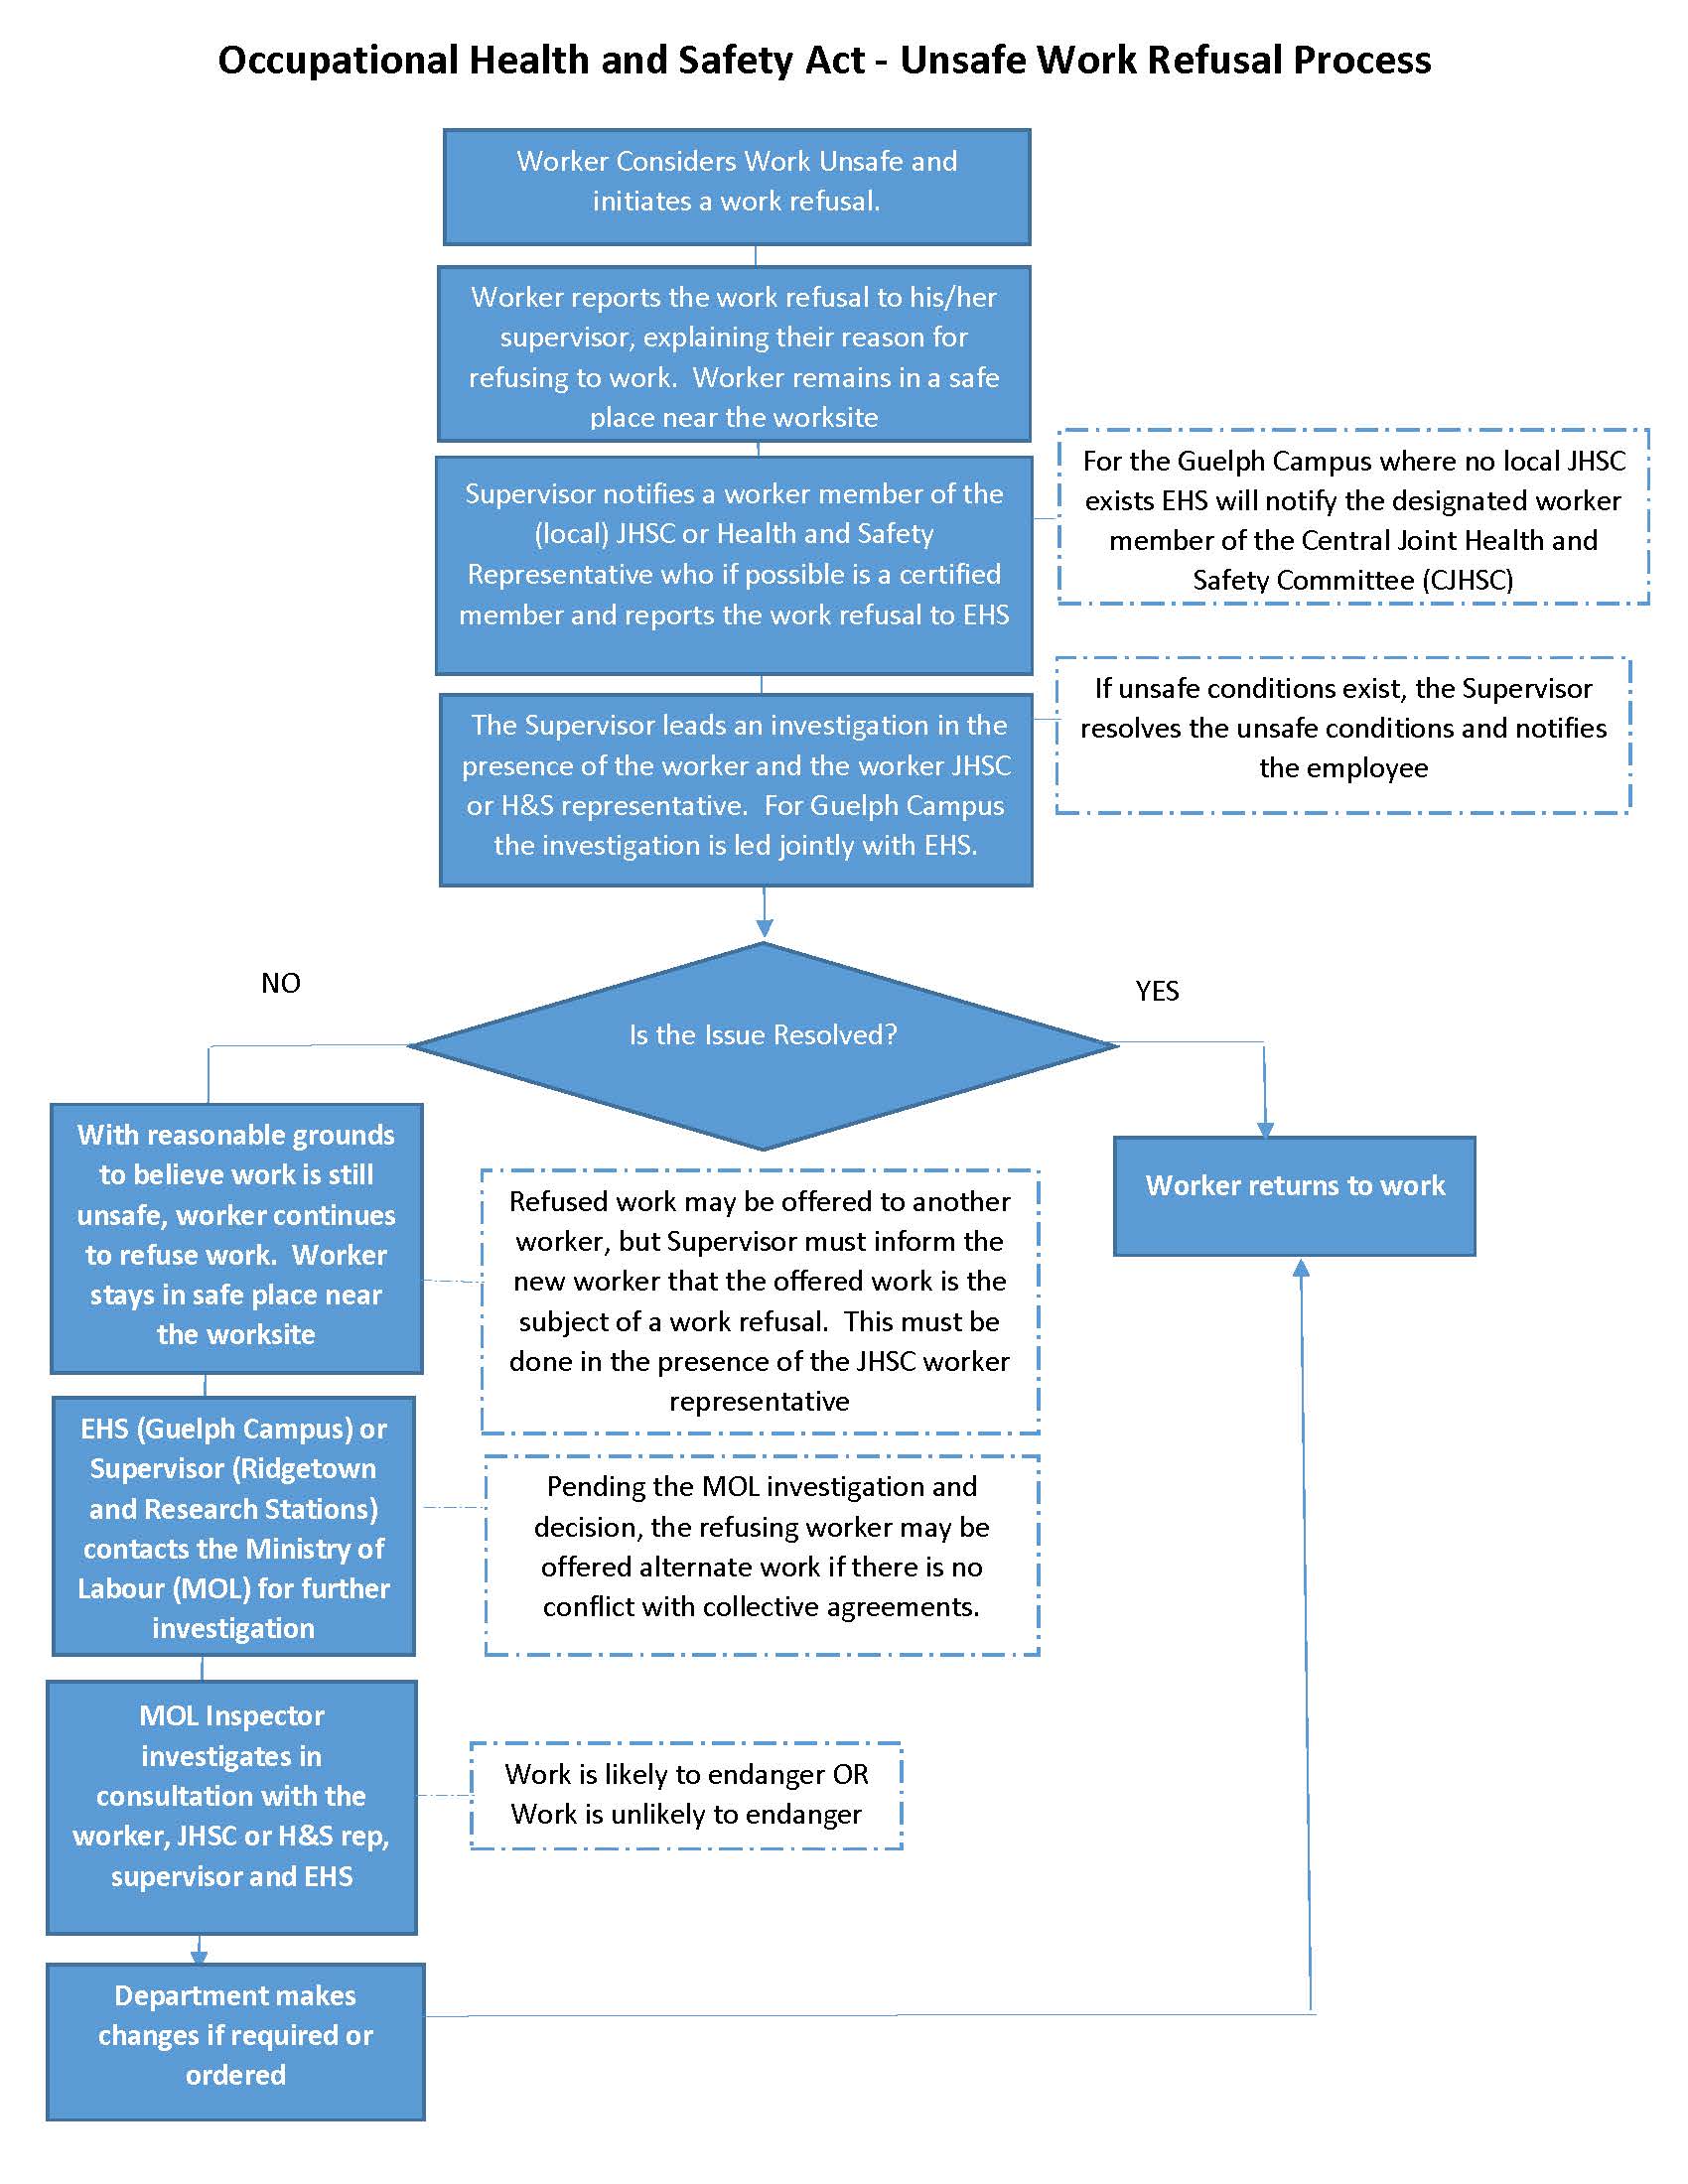 Flow Chart of the OHSA Unsafe Work Refusal Process